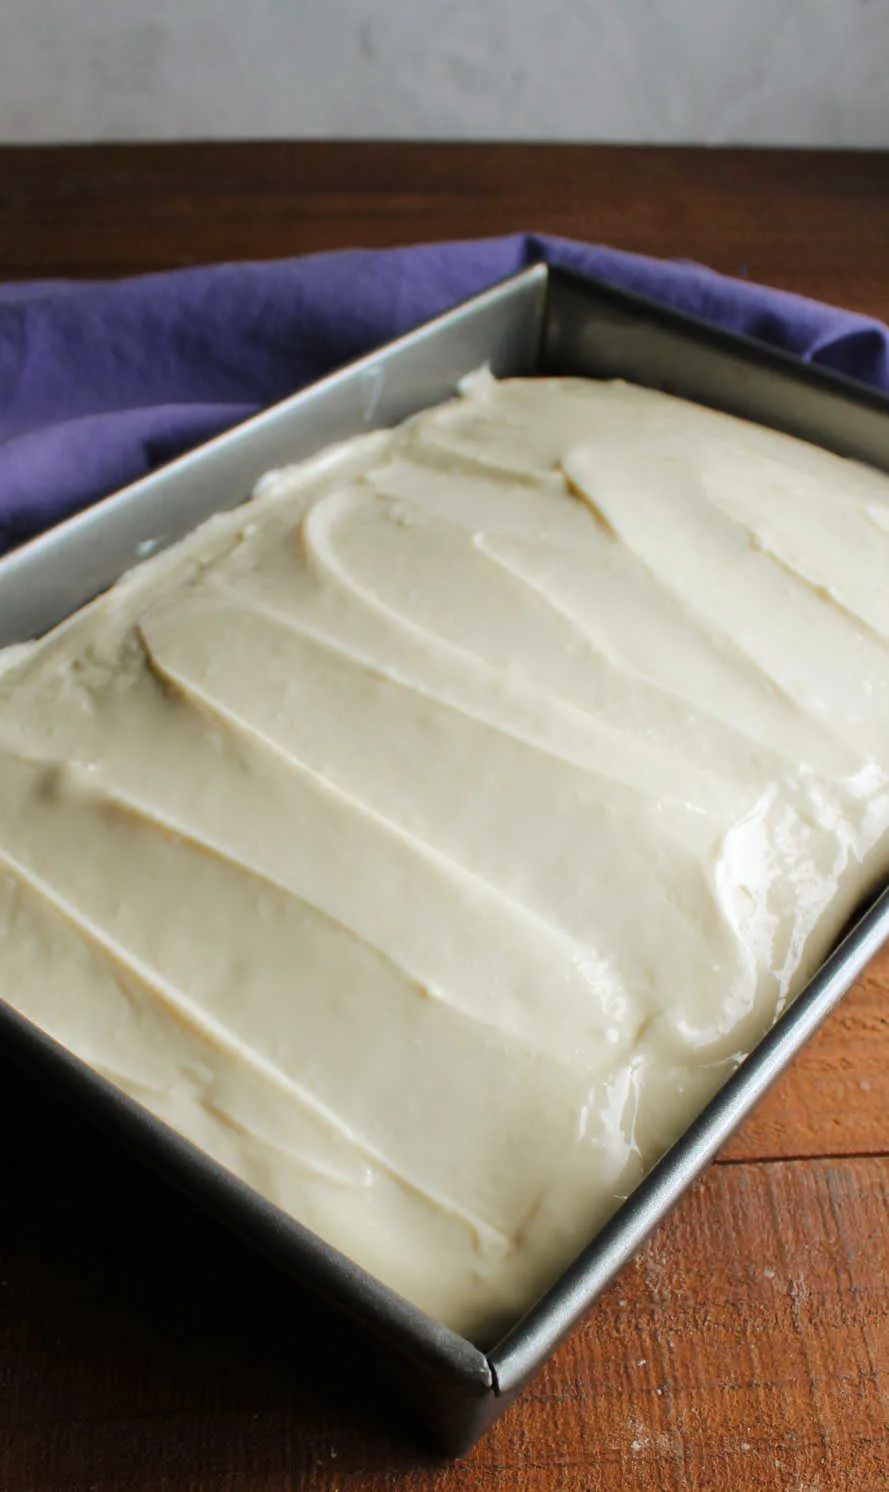 Lemon cream cheese frosting spread over cake in a 9x13-inch pan.